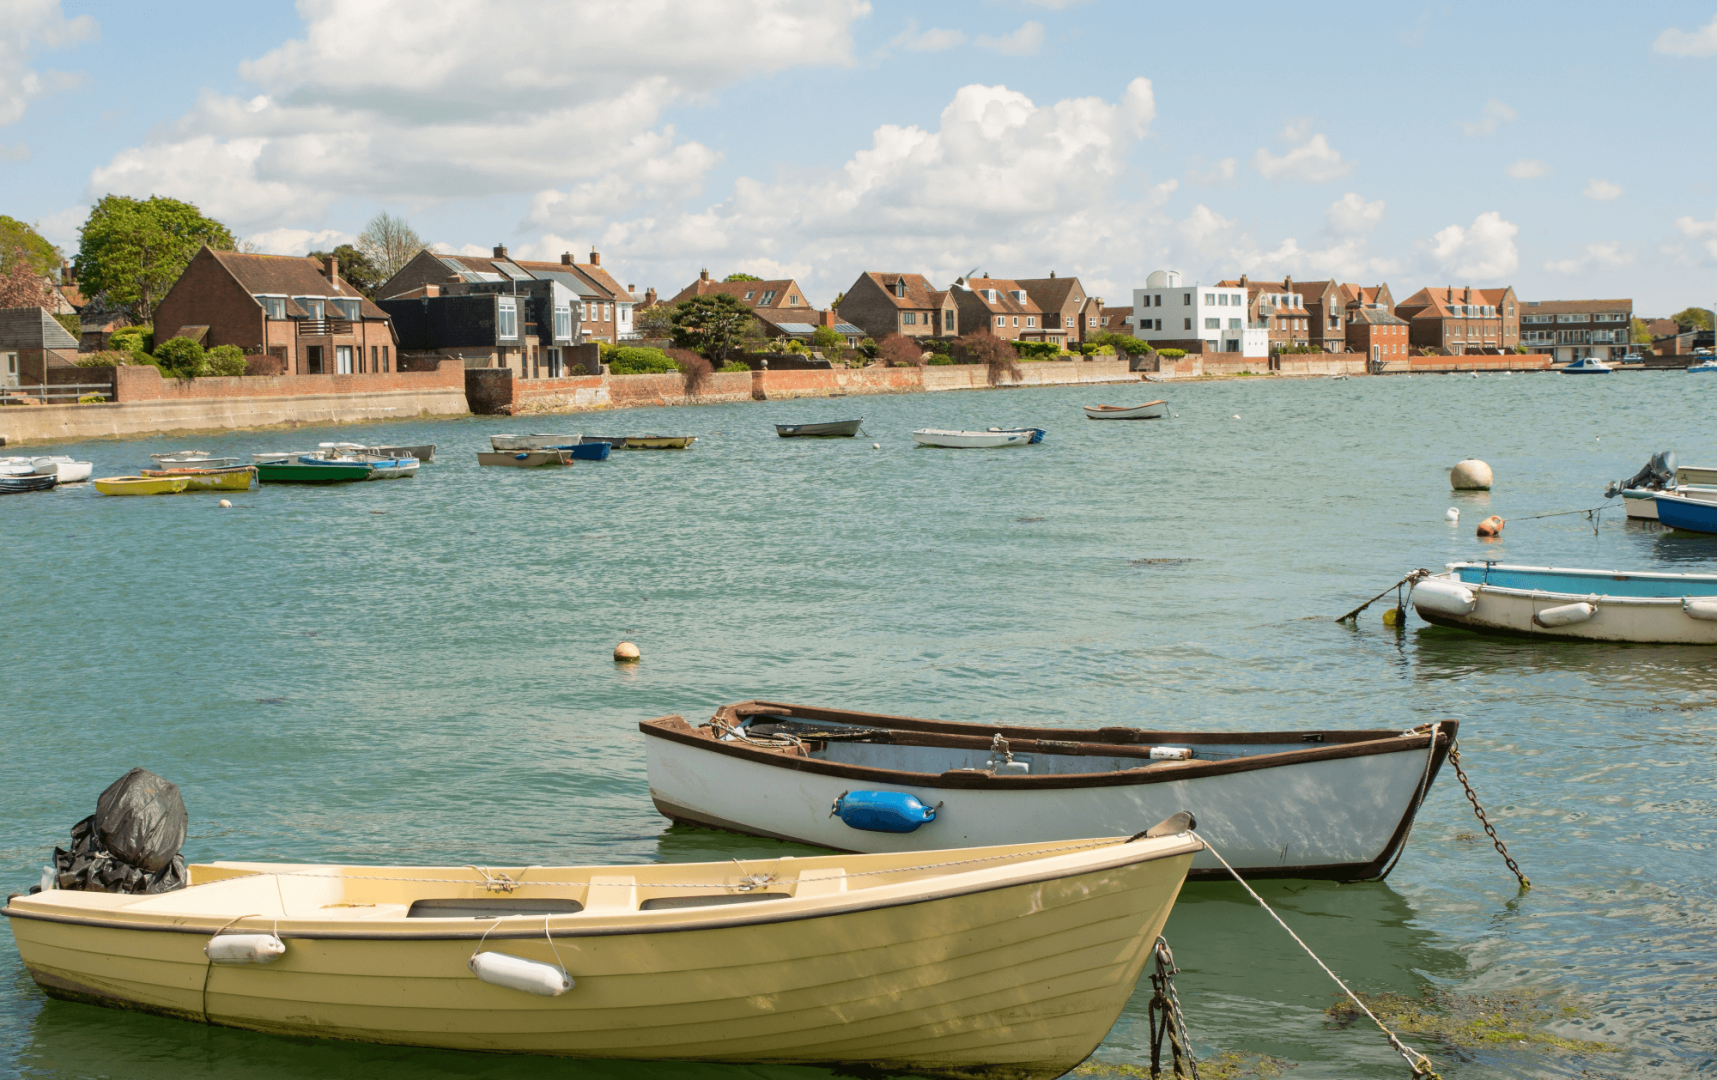 Area Guide for Emsworth and Havant